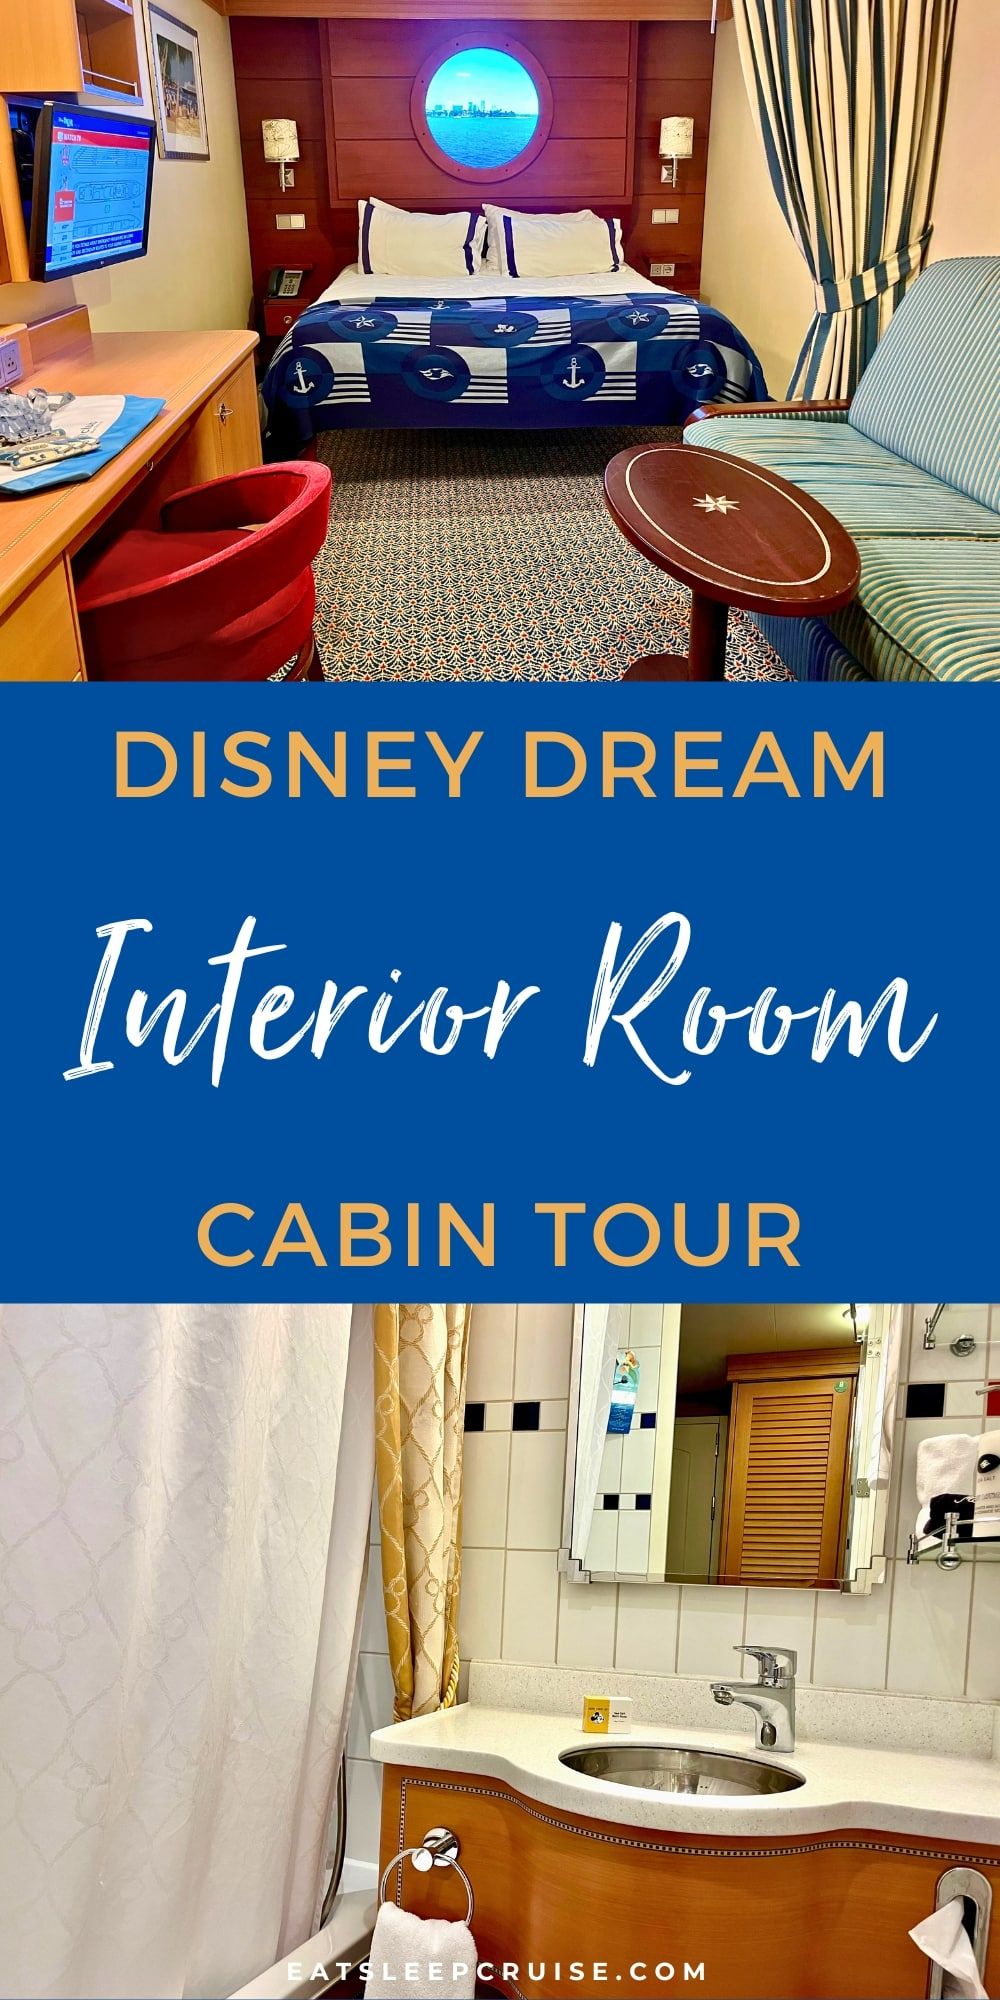 We Stayed in a Disney Dream Inside Cabin and Here's Our Review